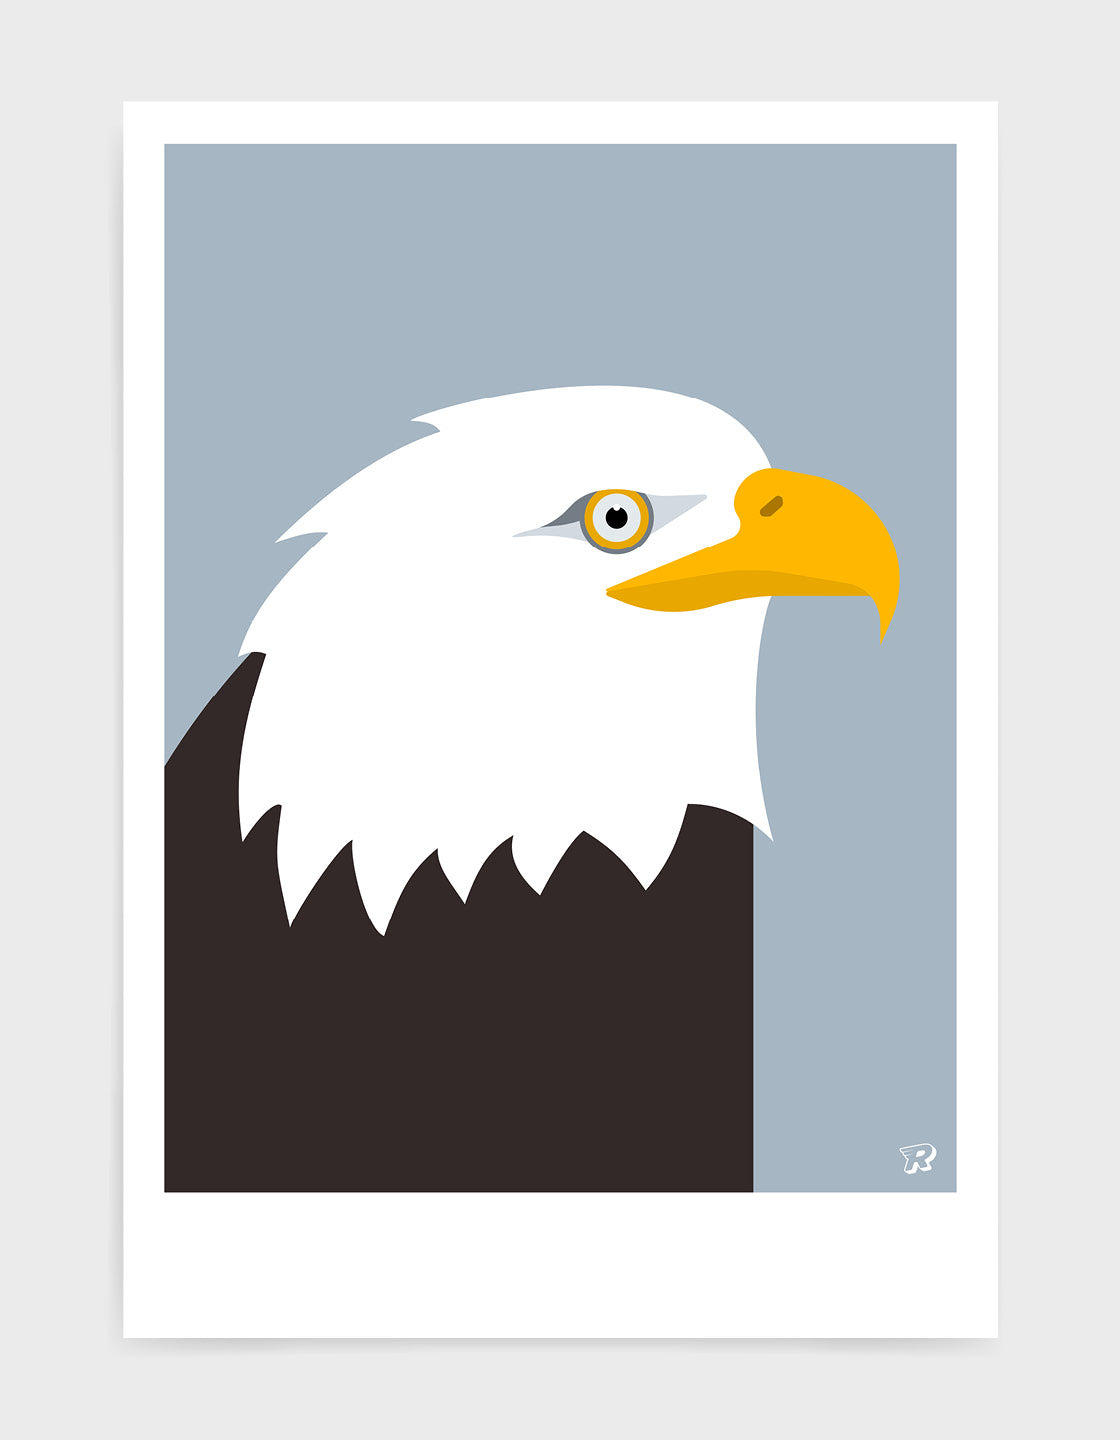 art print of an American bald eagle in profile against a light grey background